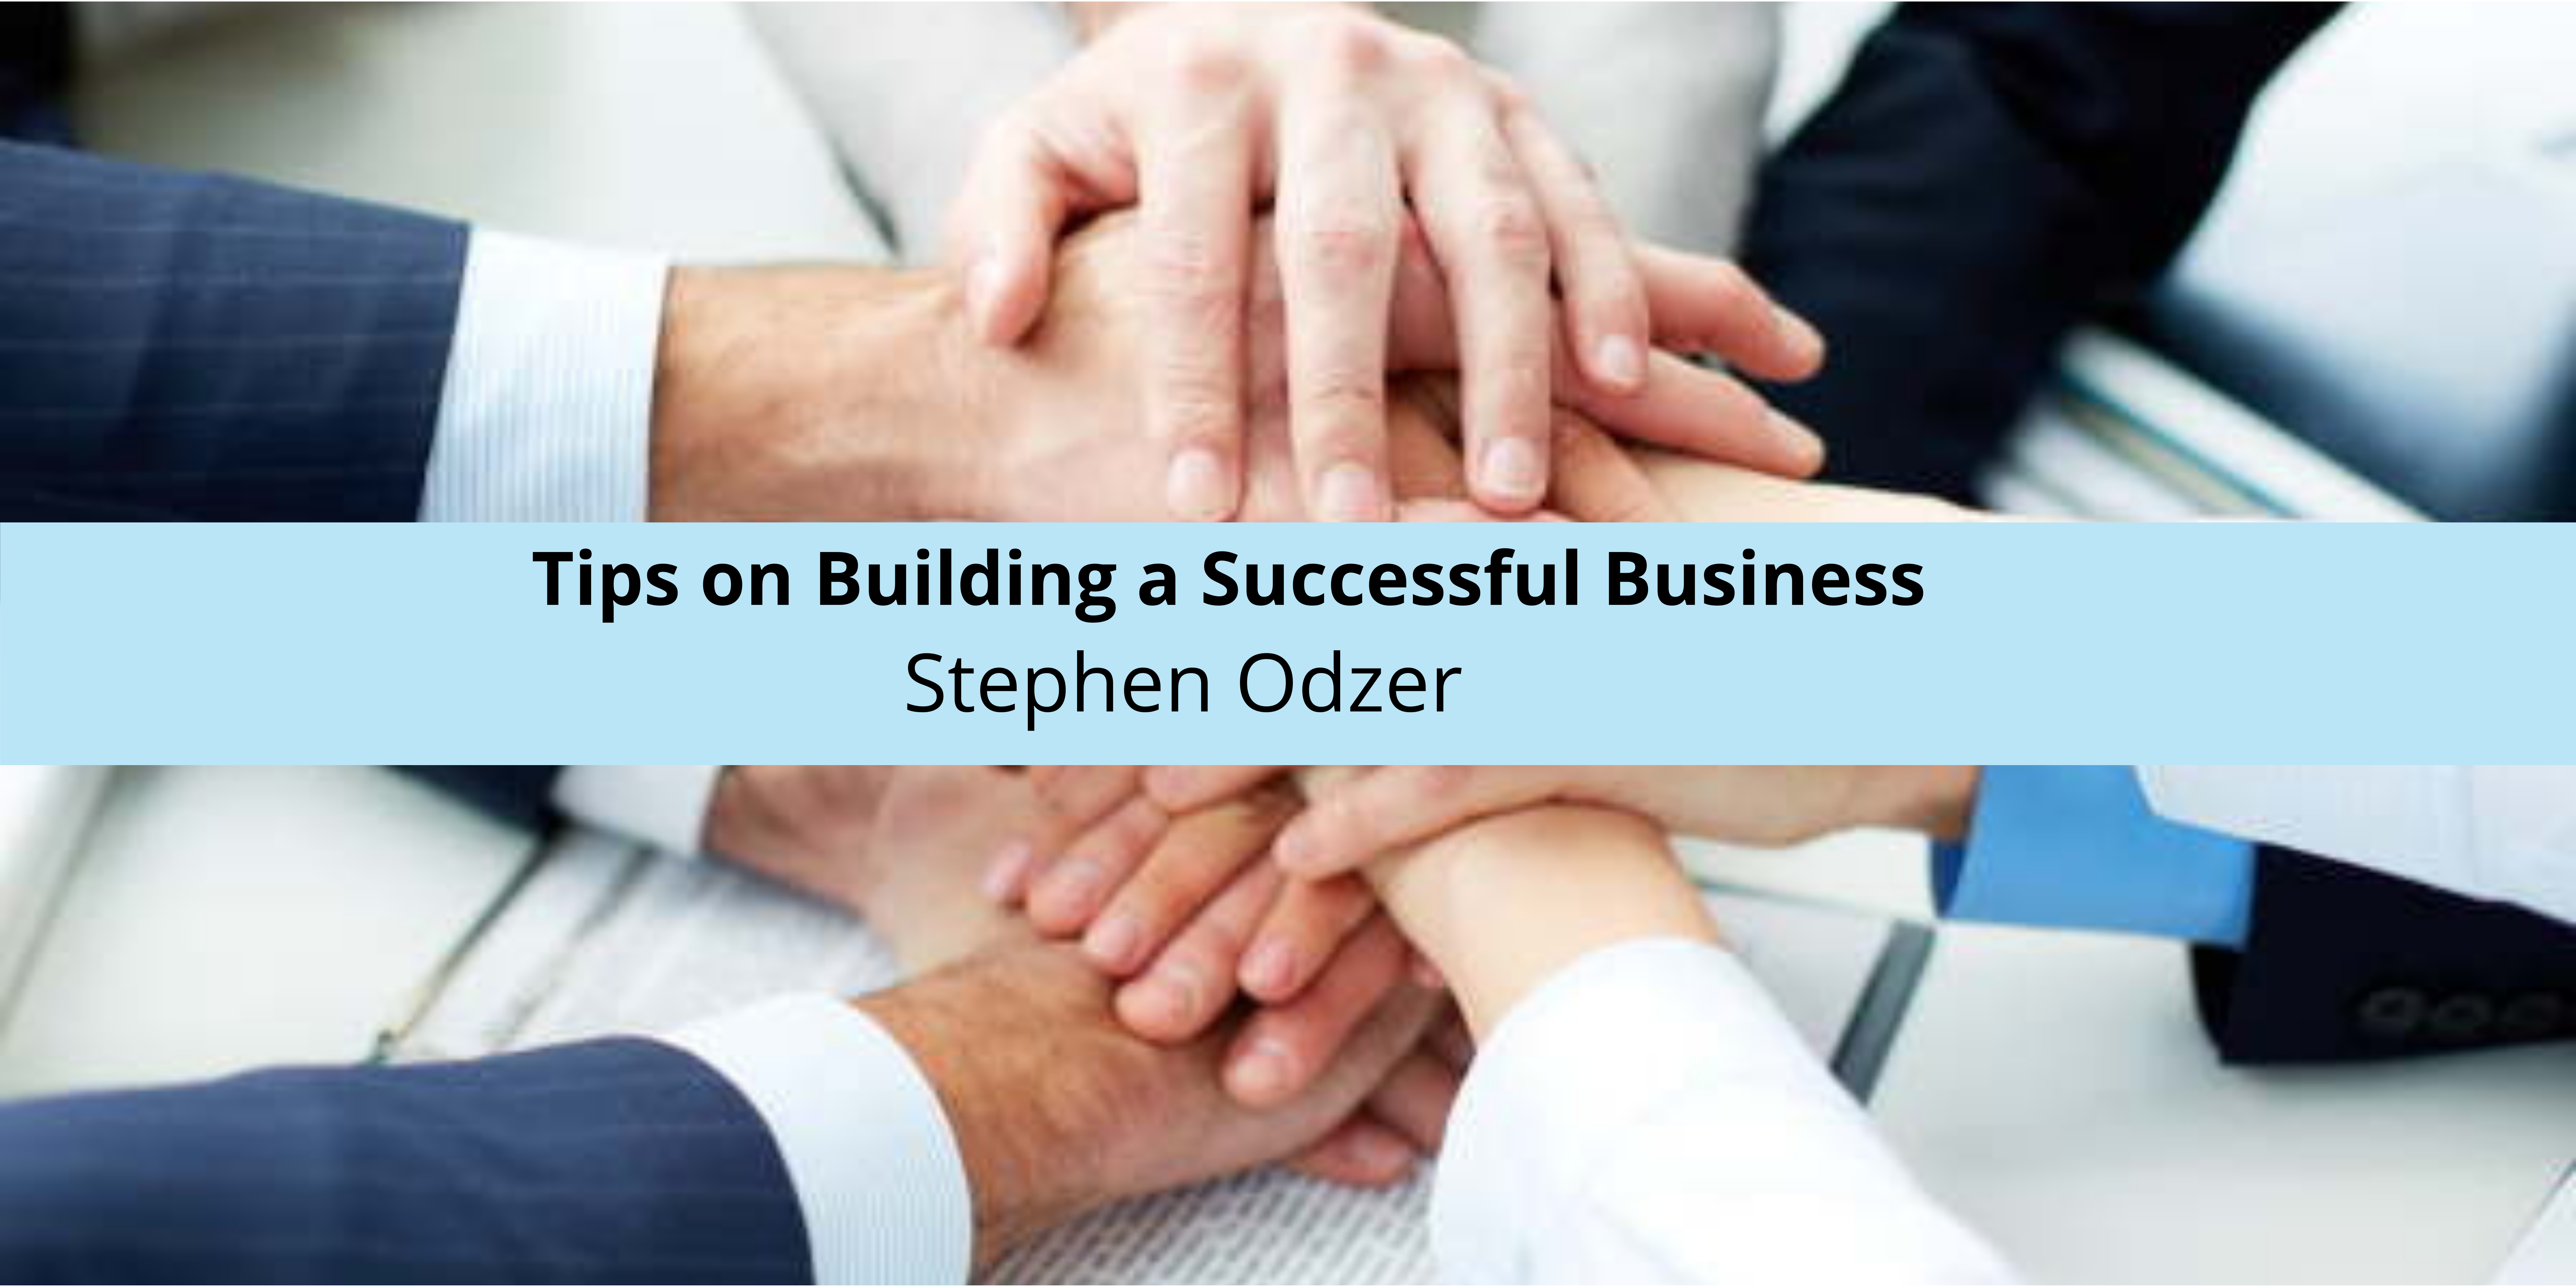 Tips on Building a Successful Business